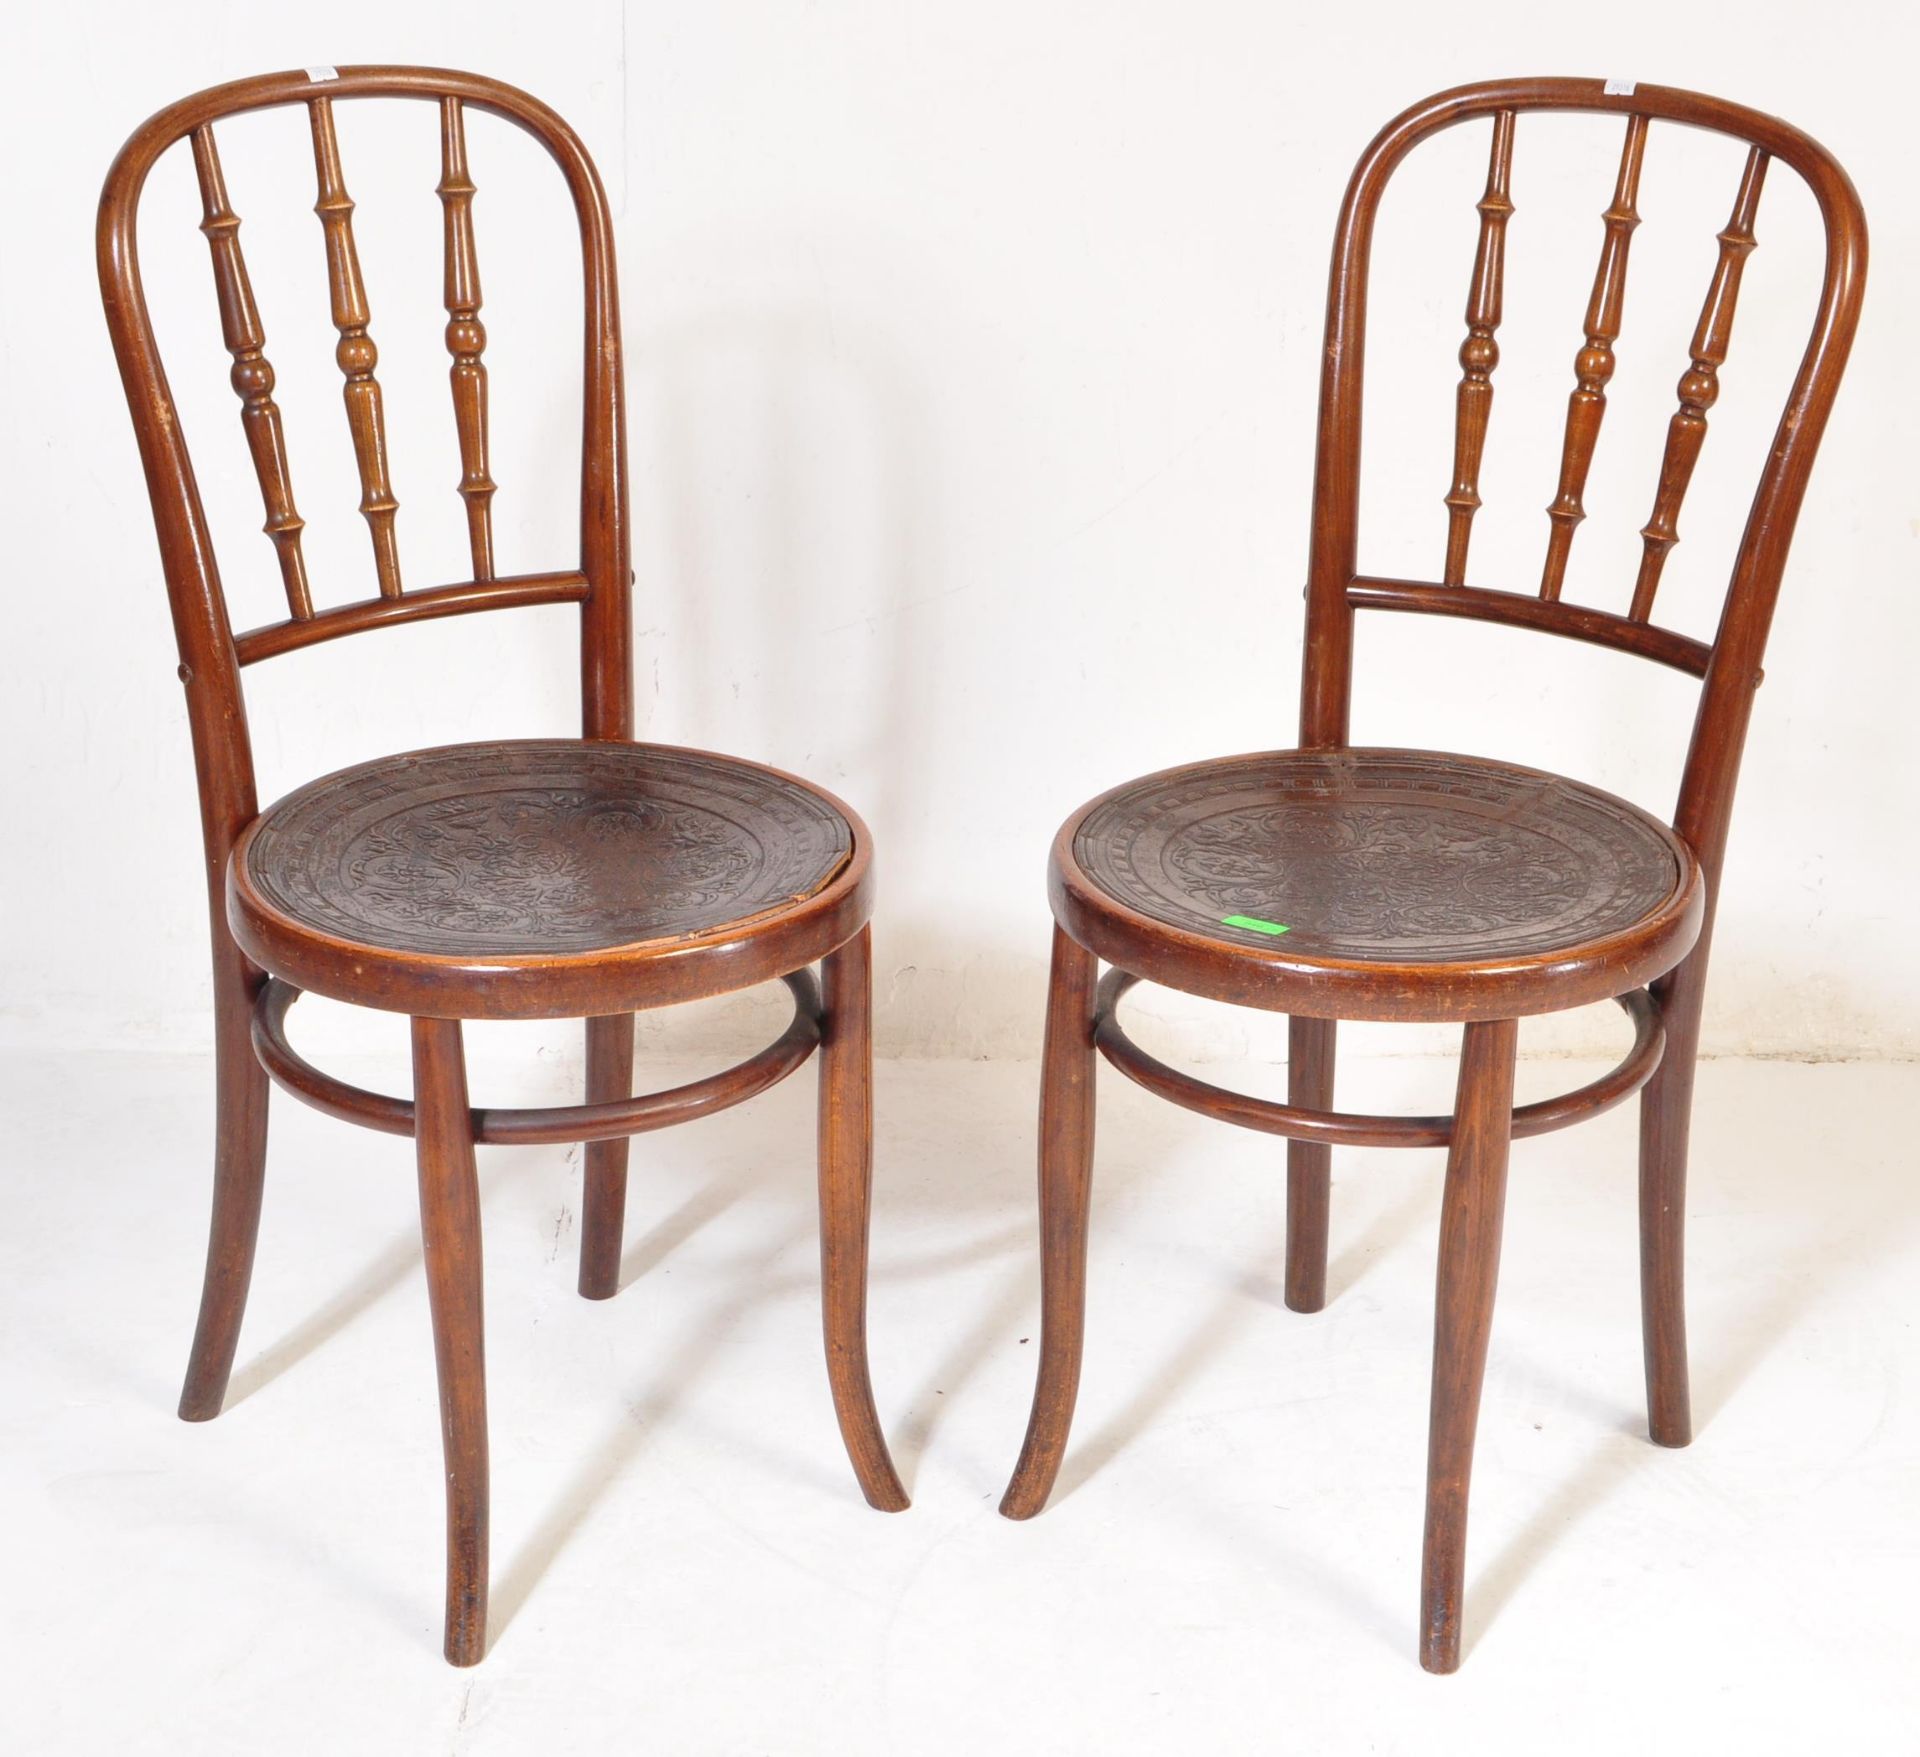 PAIR OF MID 20TH CENTURY BENTWOOD CAFE CHAIRS - Image 2 of 8